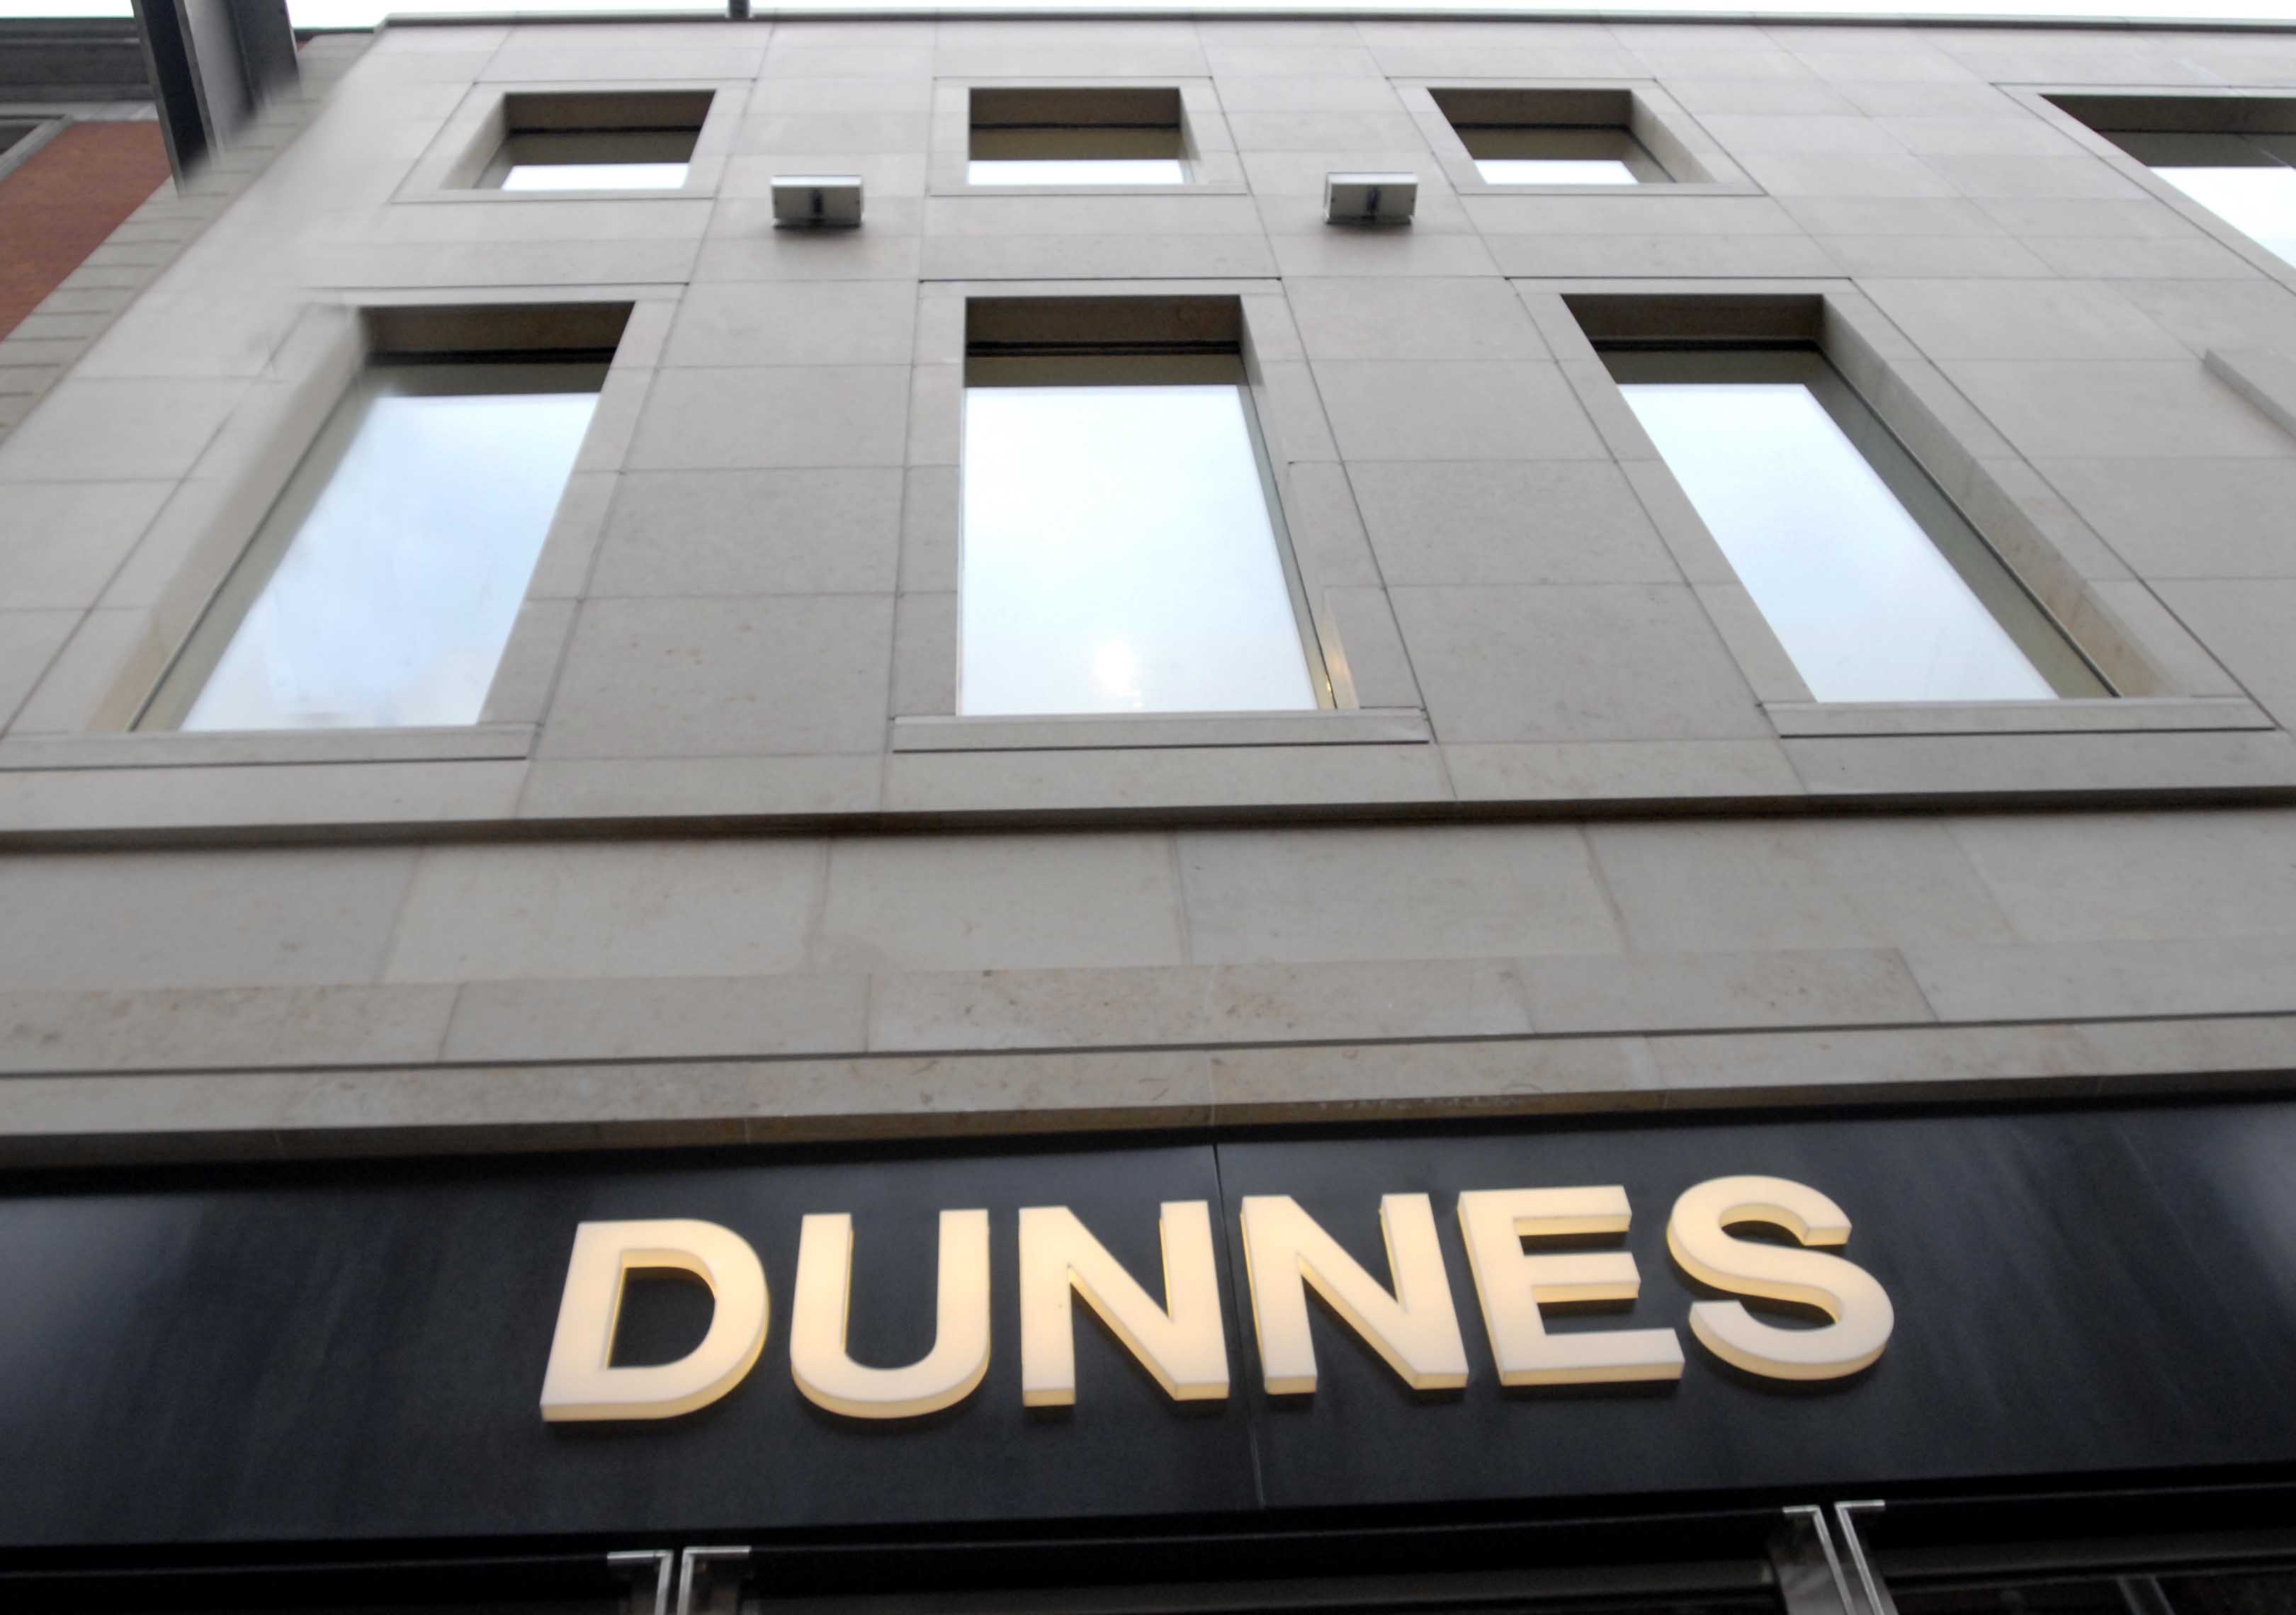 Dunnes Stores gained share to 17.6% from 17.2% during the year.